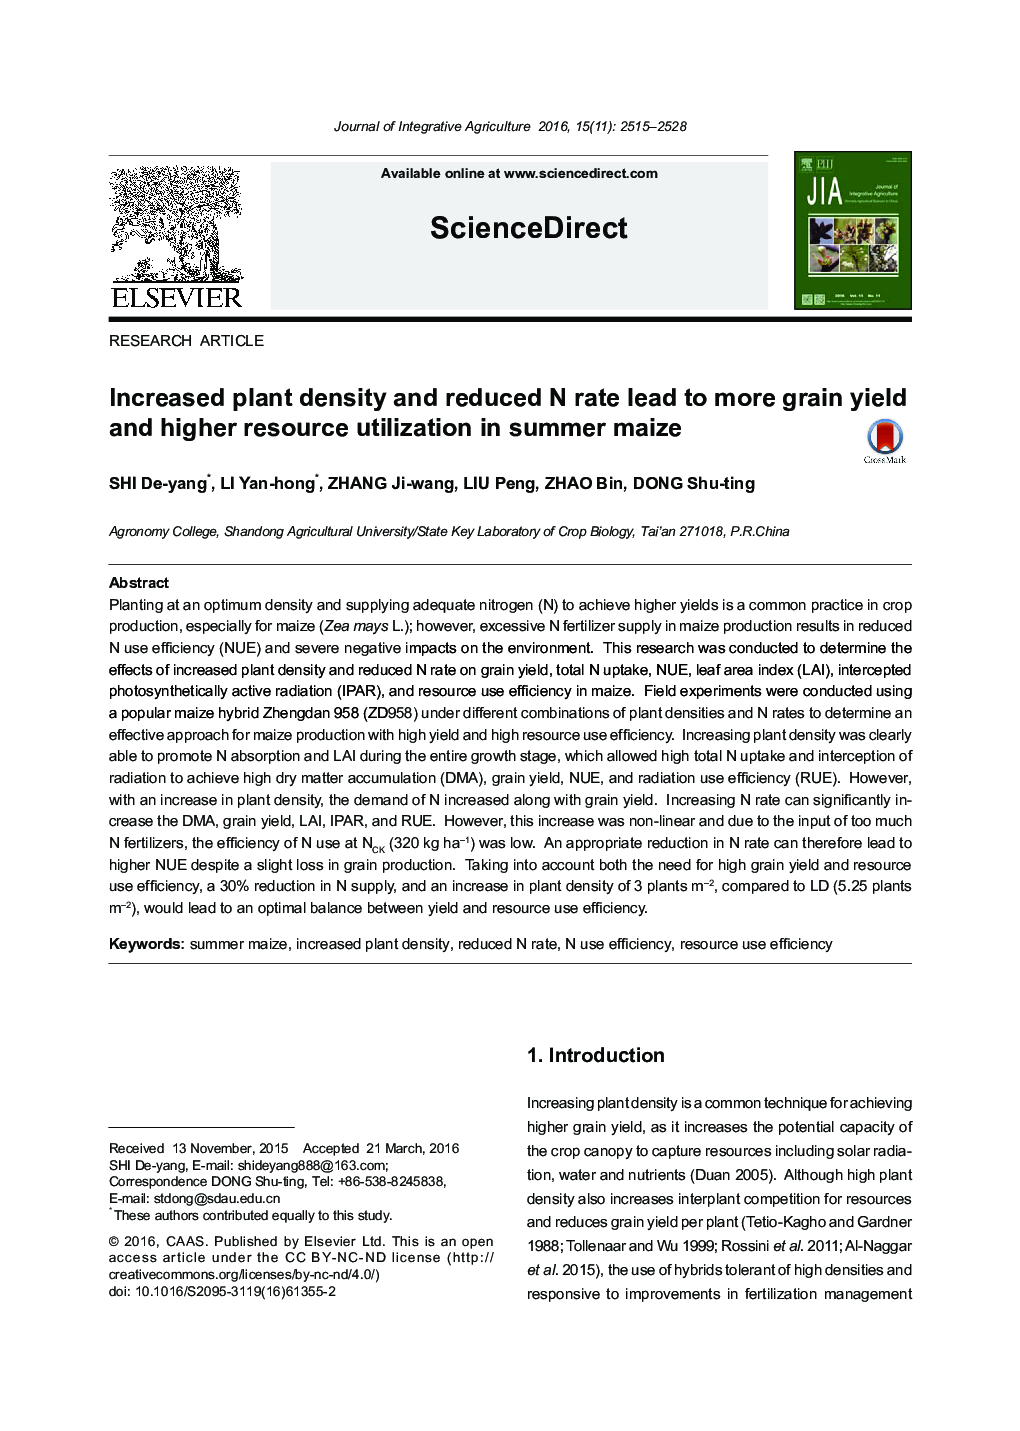 Increased plant density and reduced N rate lead to more grain yield and higher resource utilization in summer maize